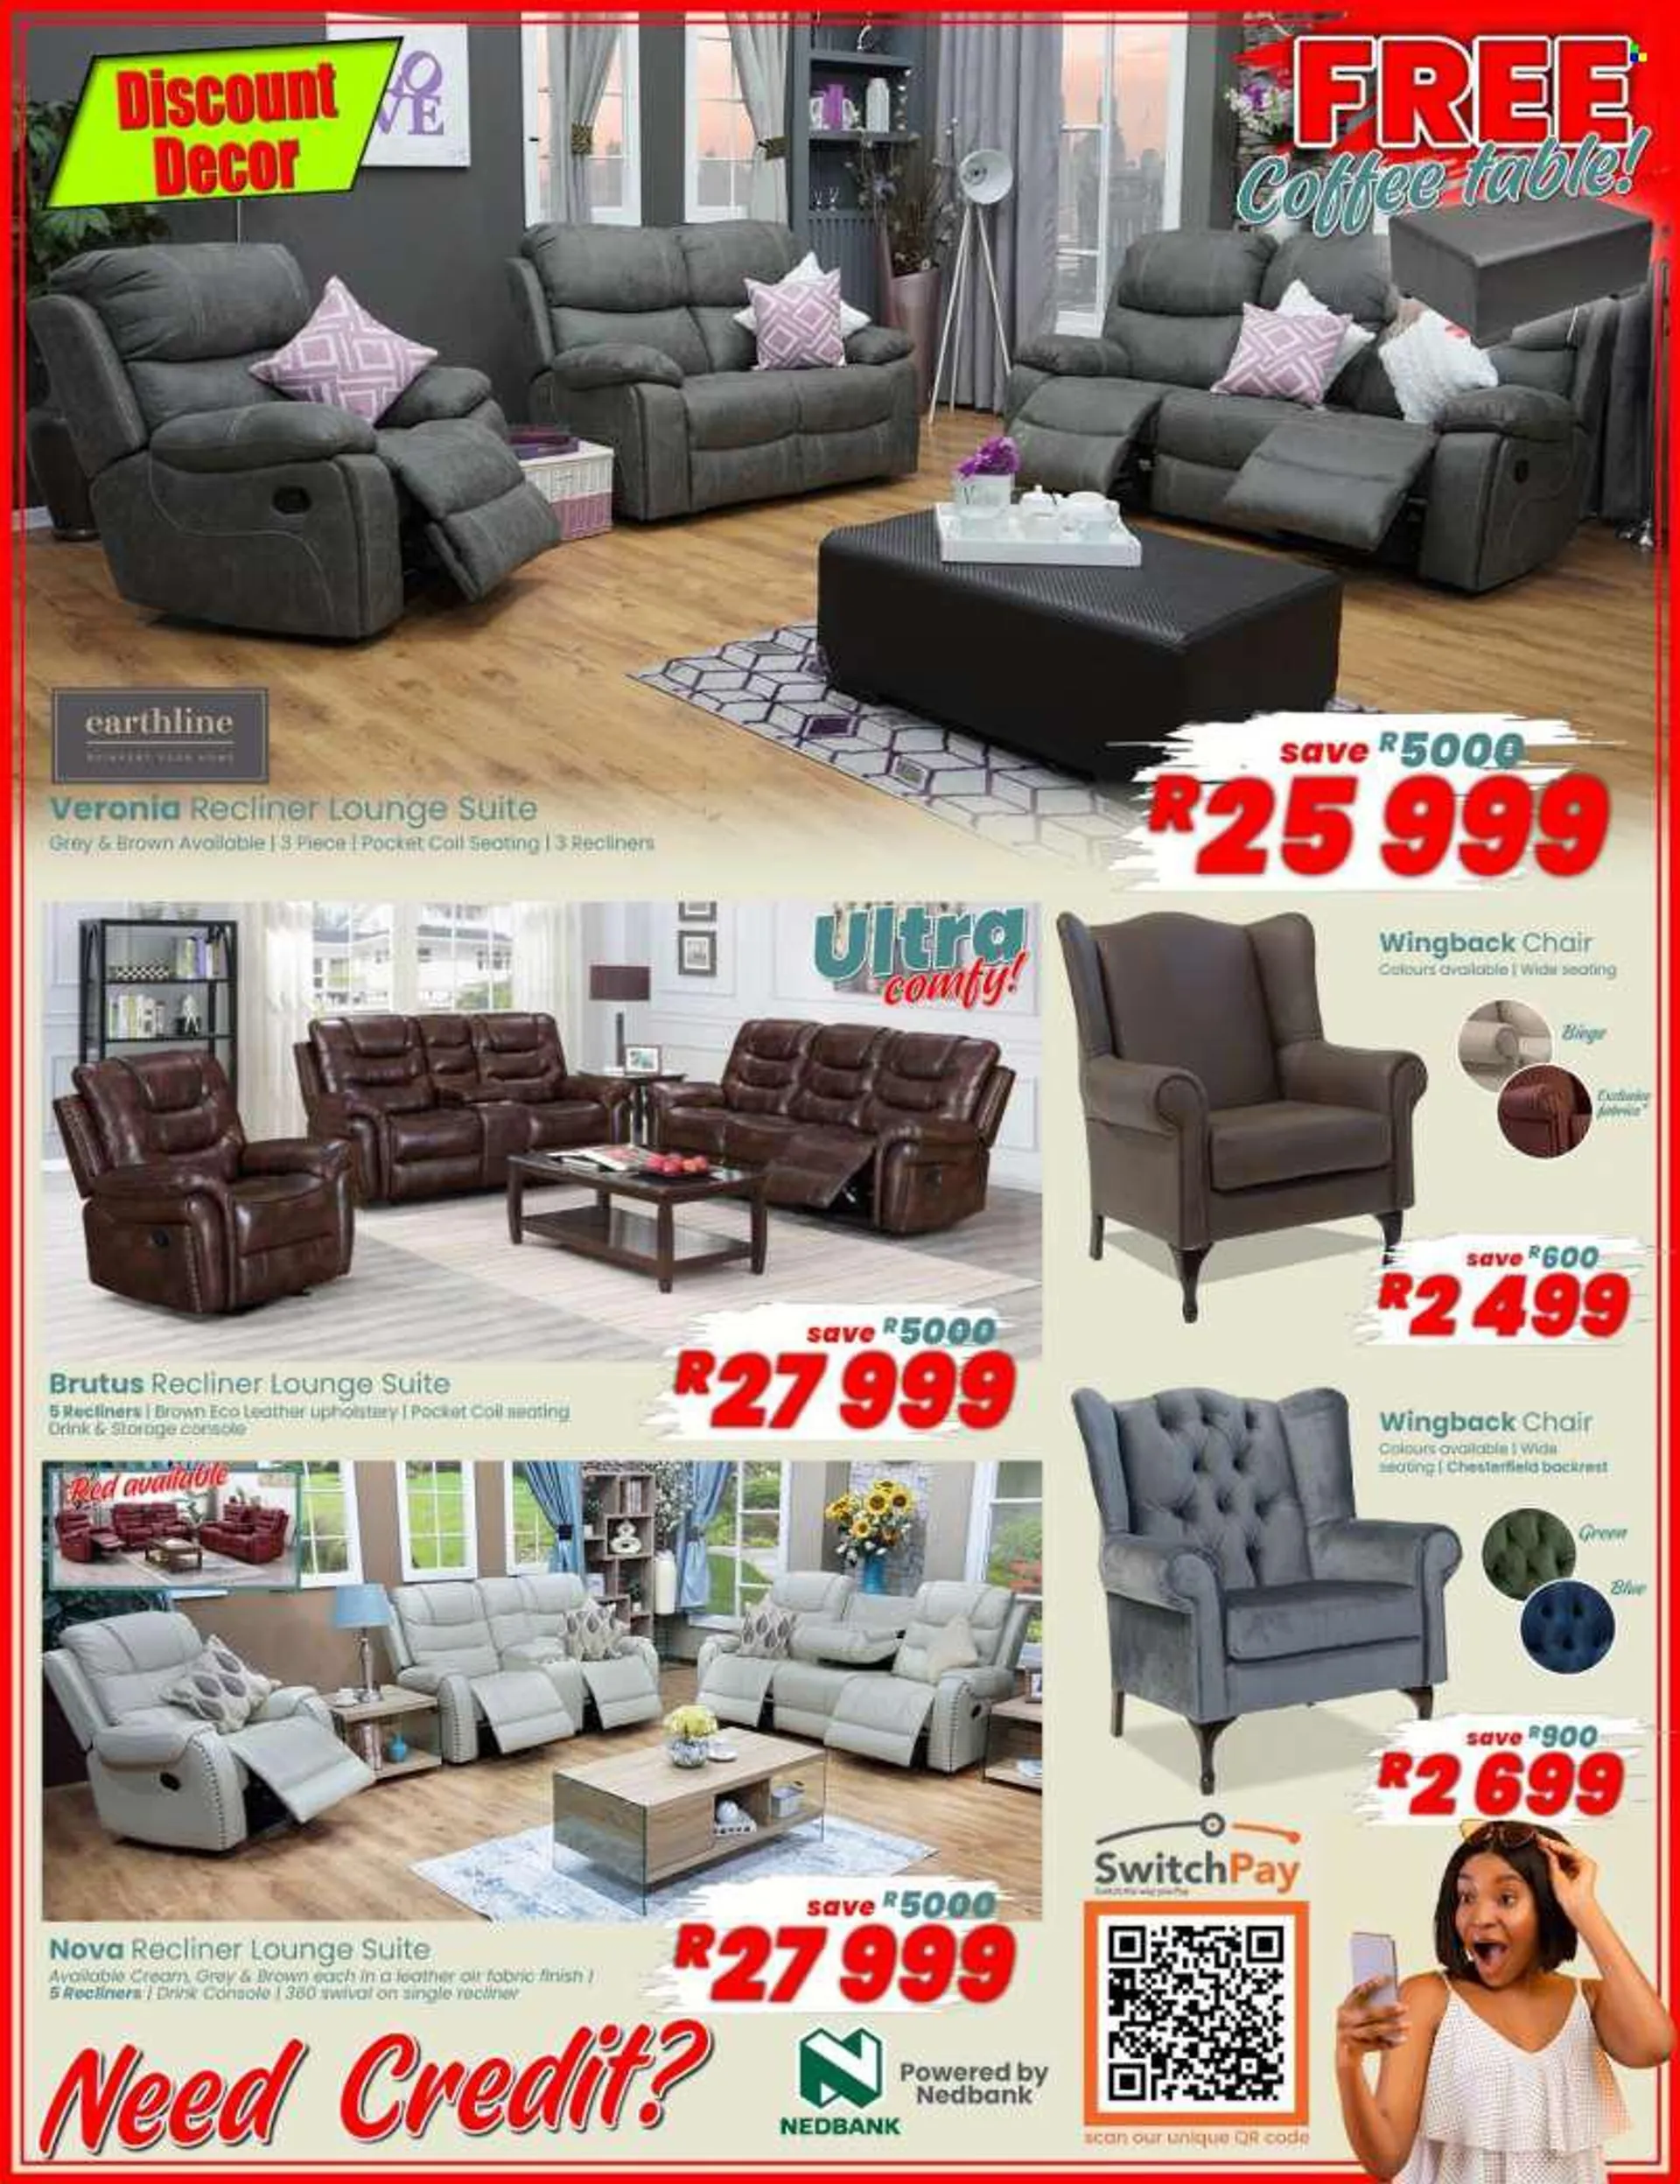 Discount Decor catalogue  - 15/03/2022 - 31/05/2022. - 15 March 31 May 2022 - Page 3